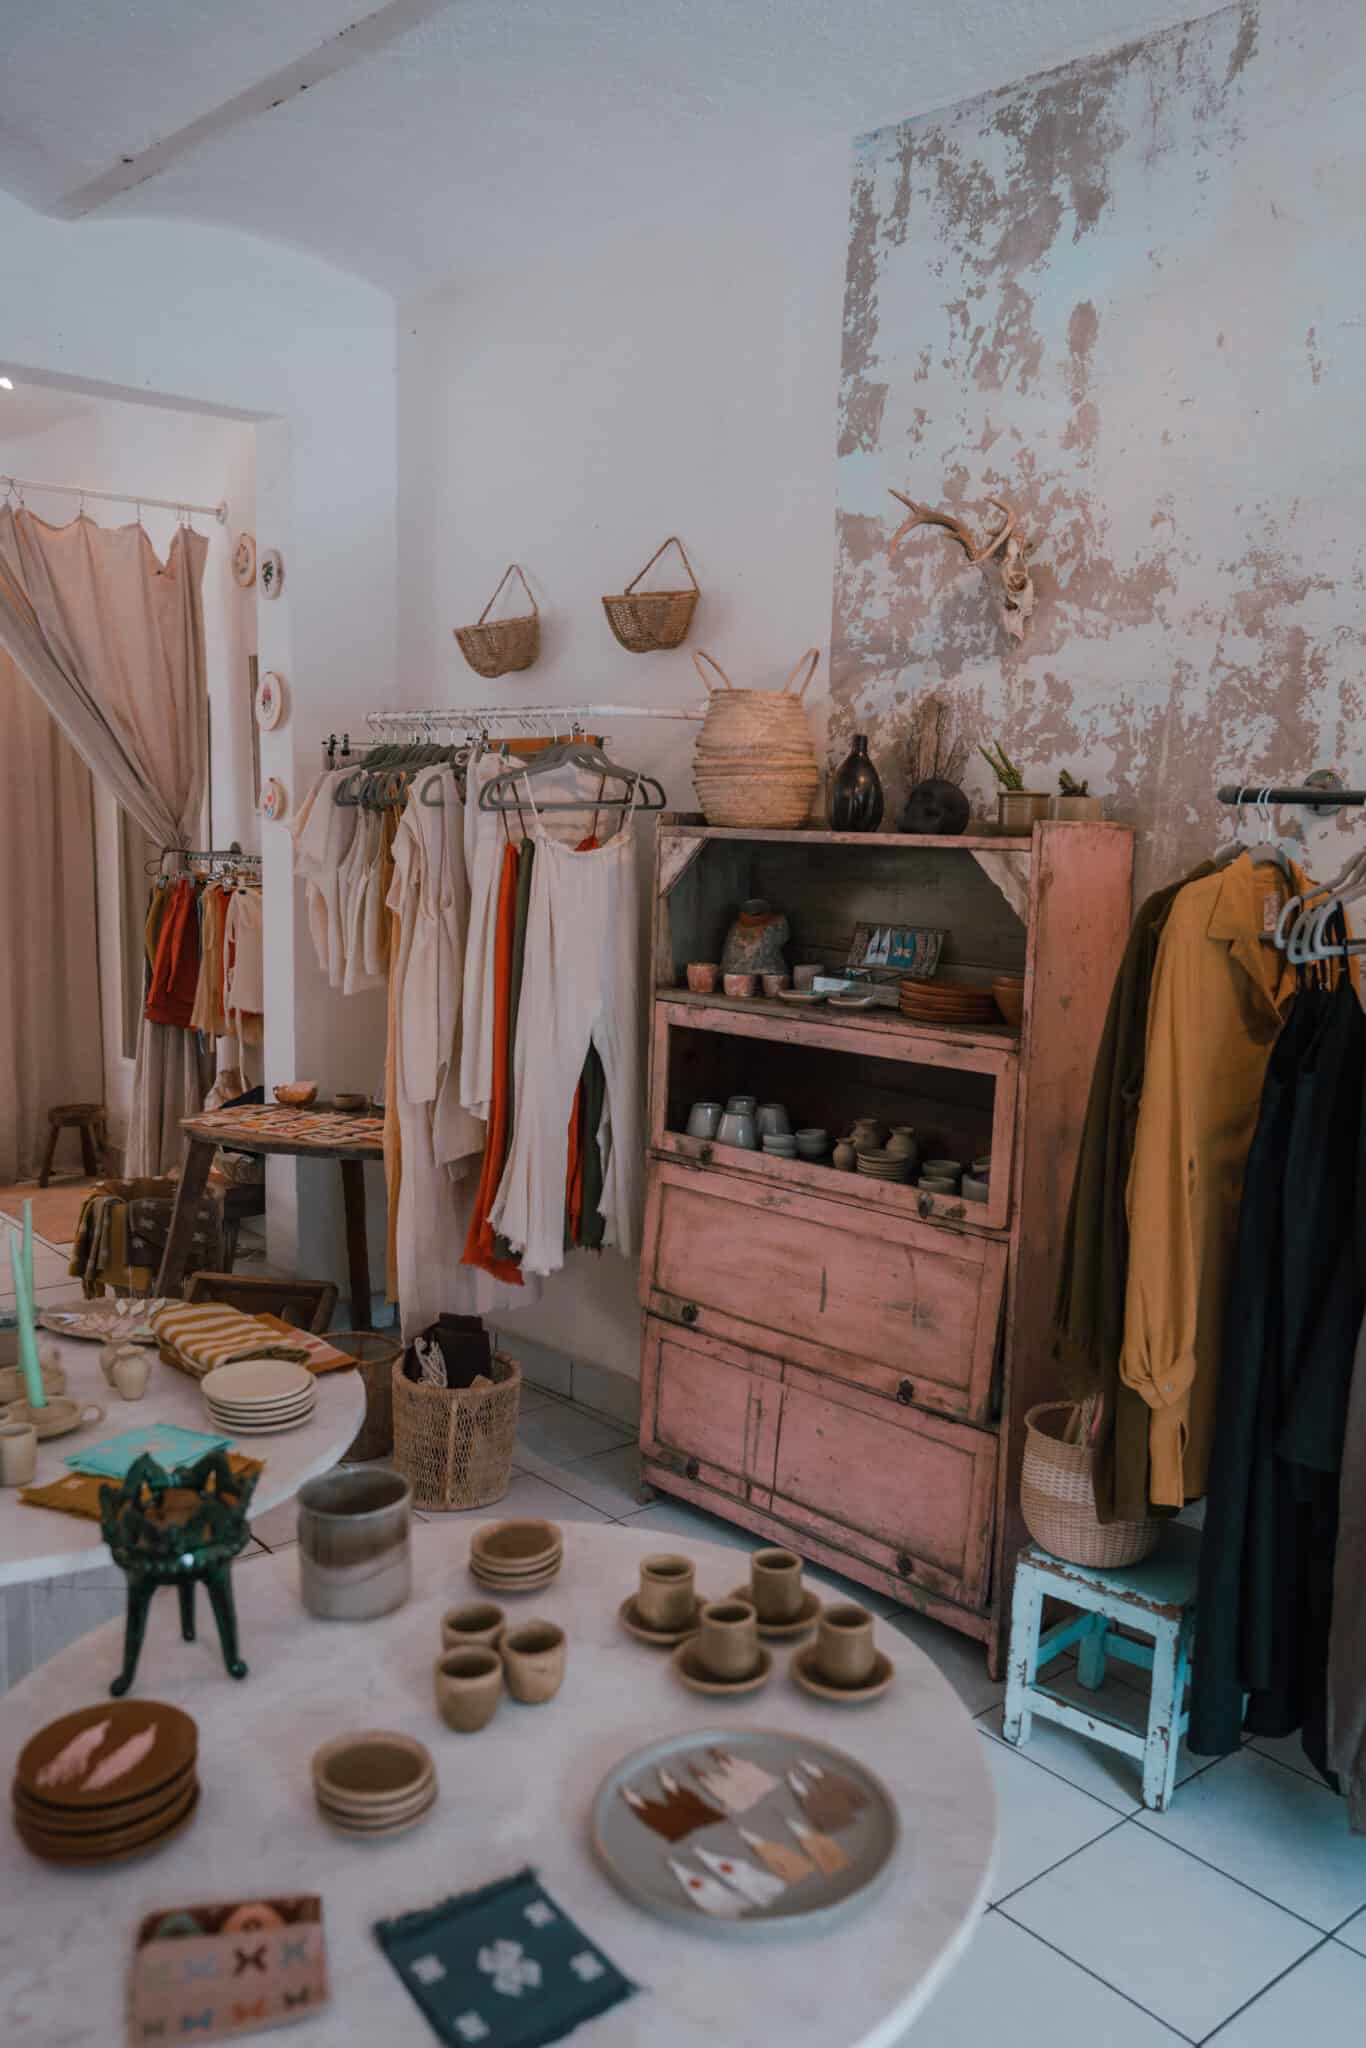 The Sayulita shop offers a variety of clothes and a table inside its charming interior.